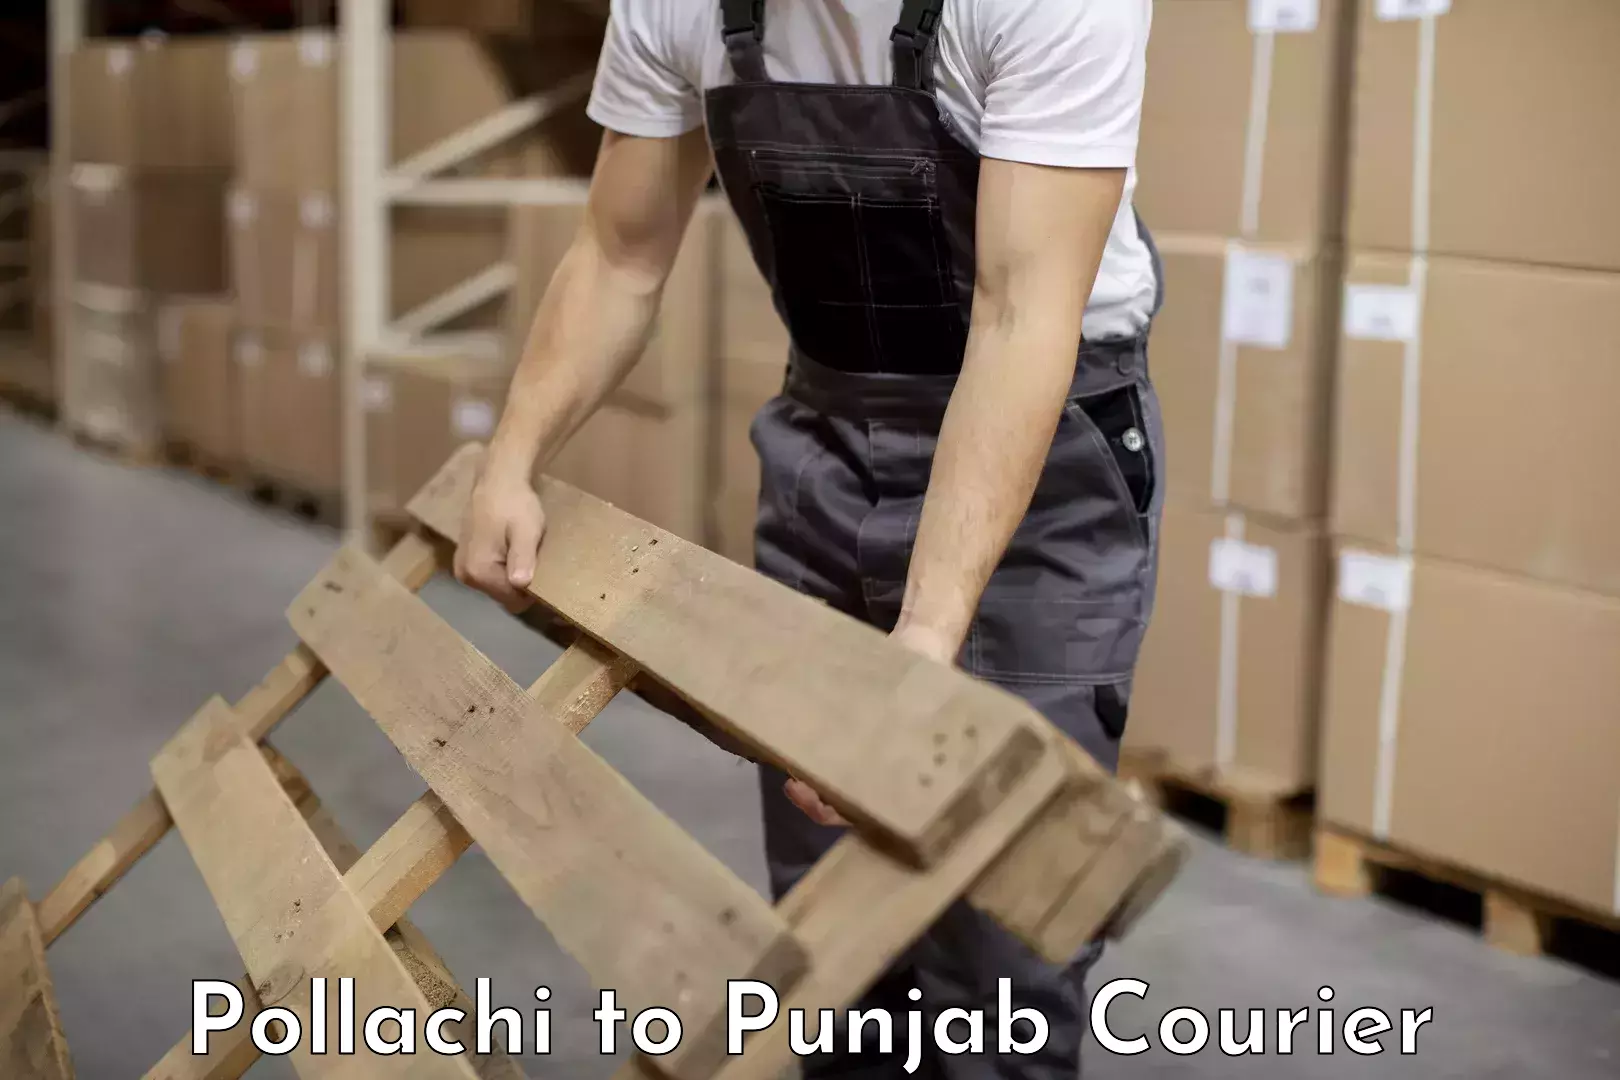 Furniture delivery service Pollachi to Mohali